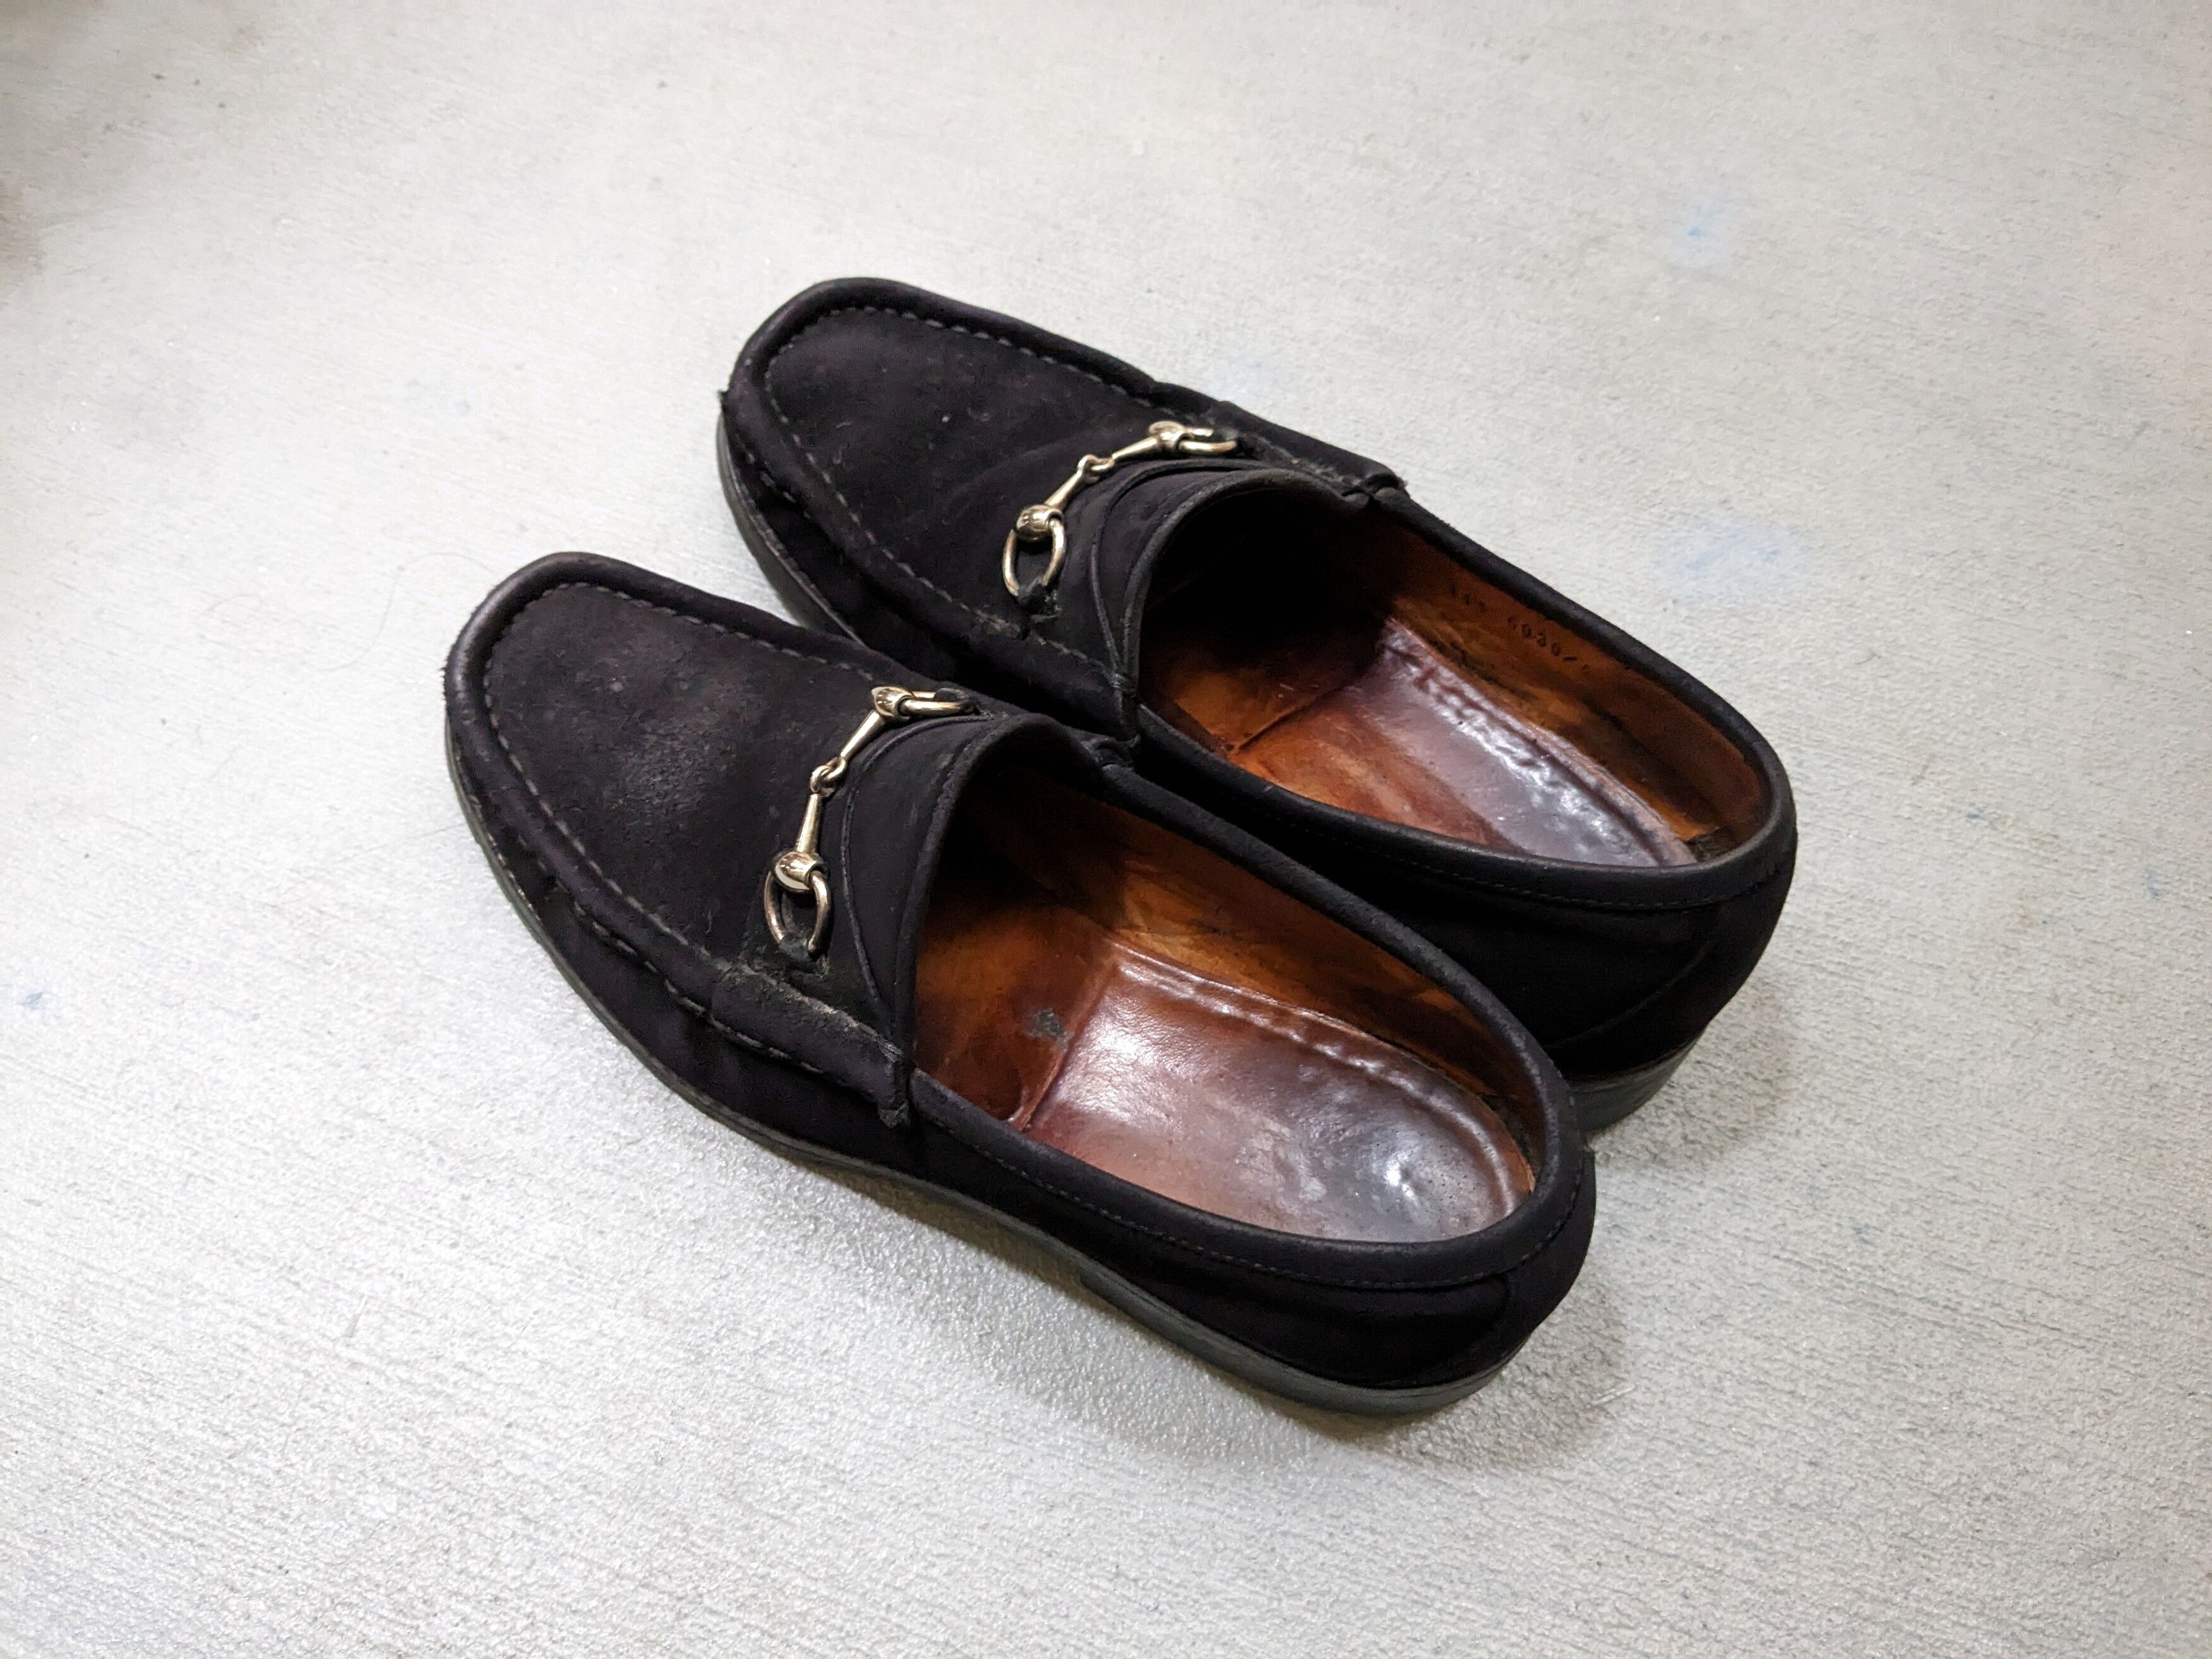 Gucci Gucci Horsebit Loafers Black Leather Size 9.5 Italy Slip On Size US 9.5 / EU 42-43 - 13 Thumbnail